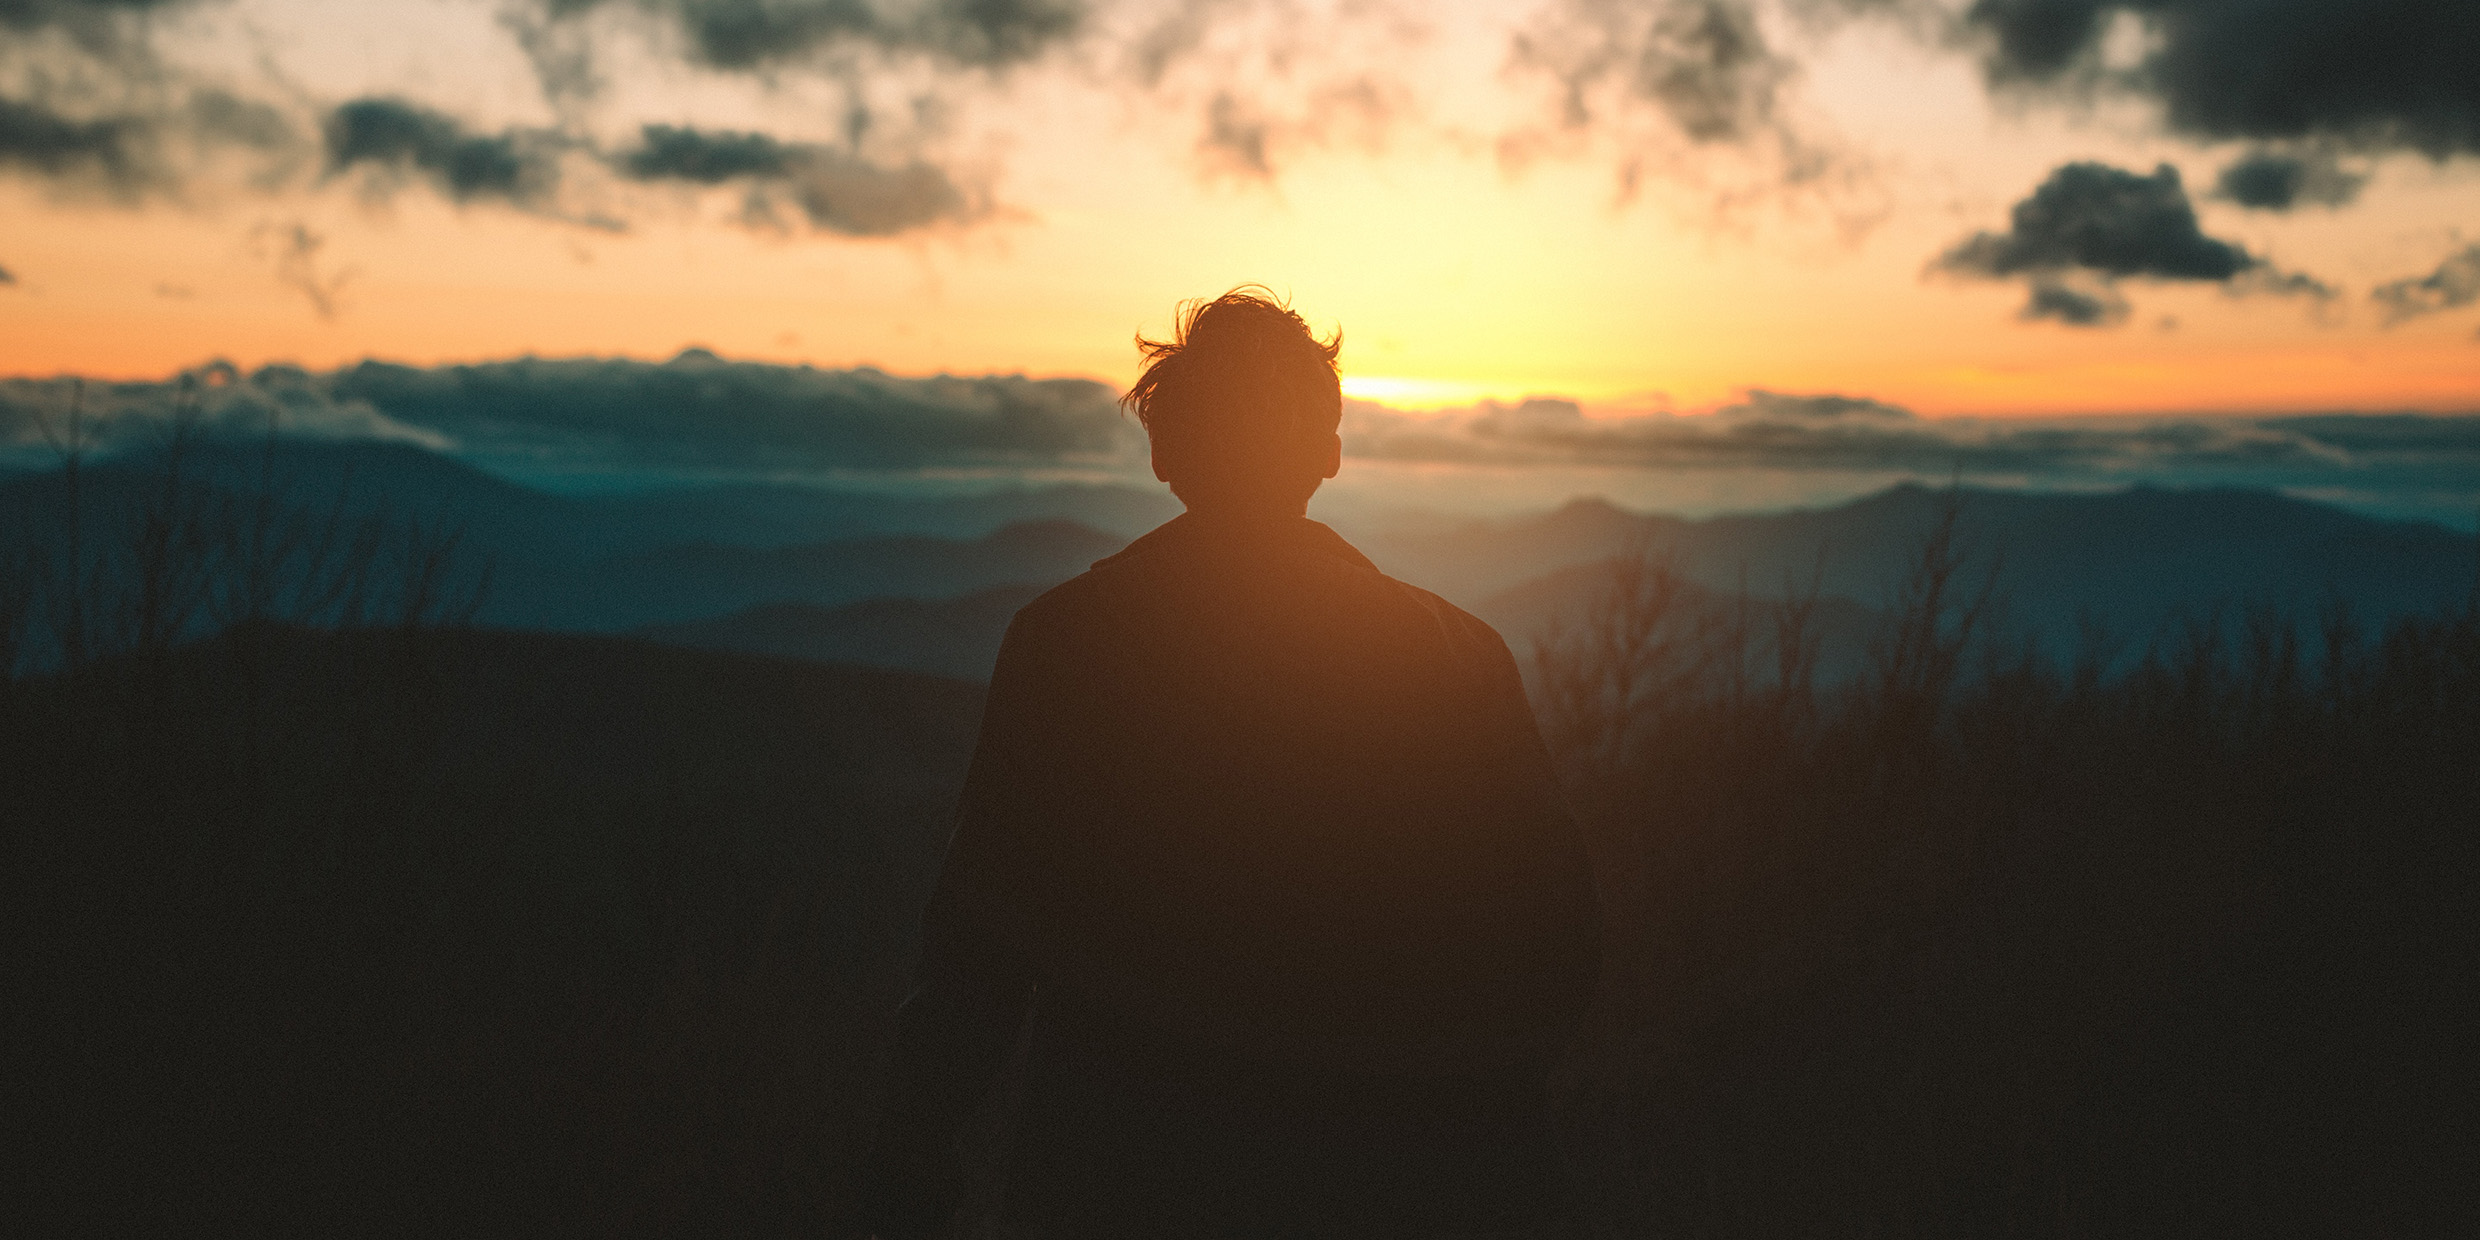 Image of a man in silhouette observing the sunrise